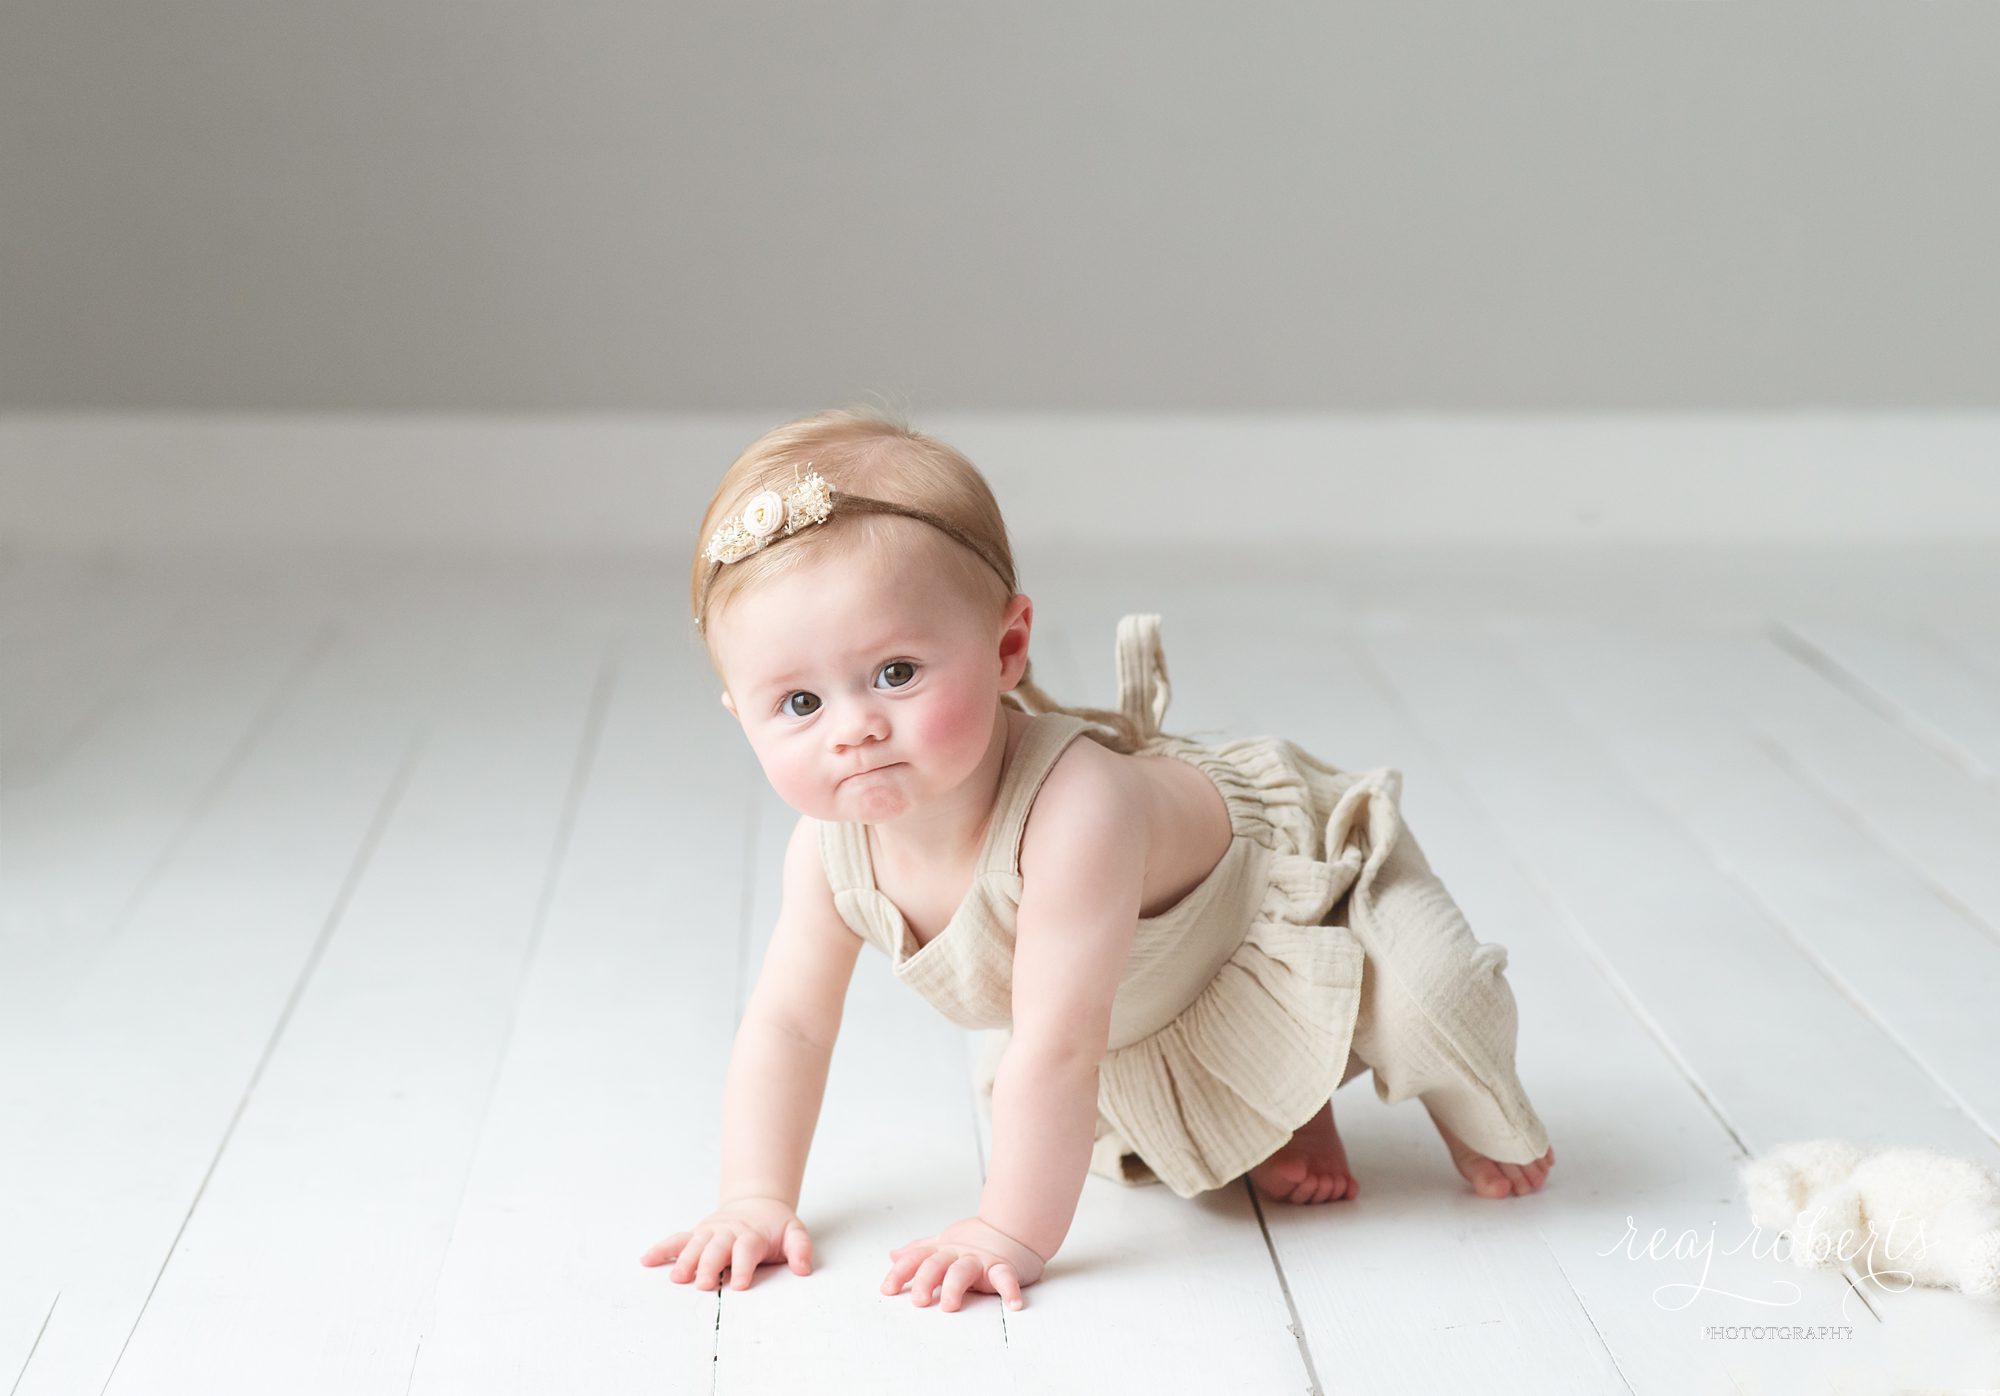 6 month baby crawling photo ideas | Reaj Roberts Photography